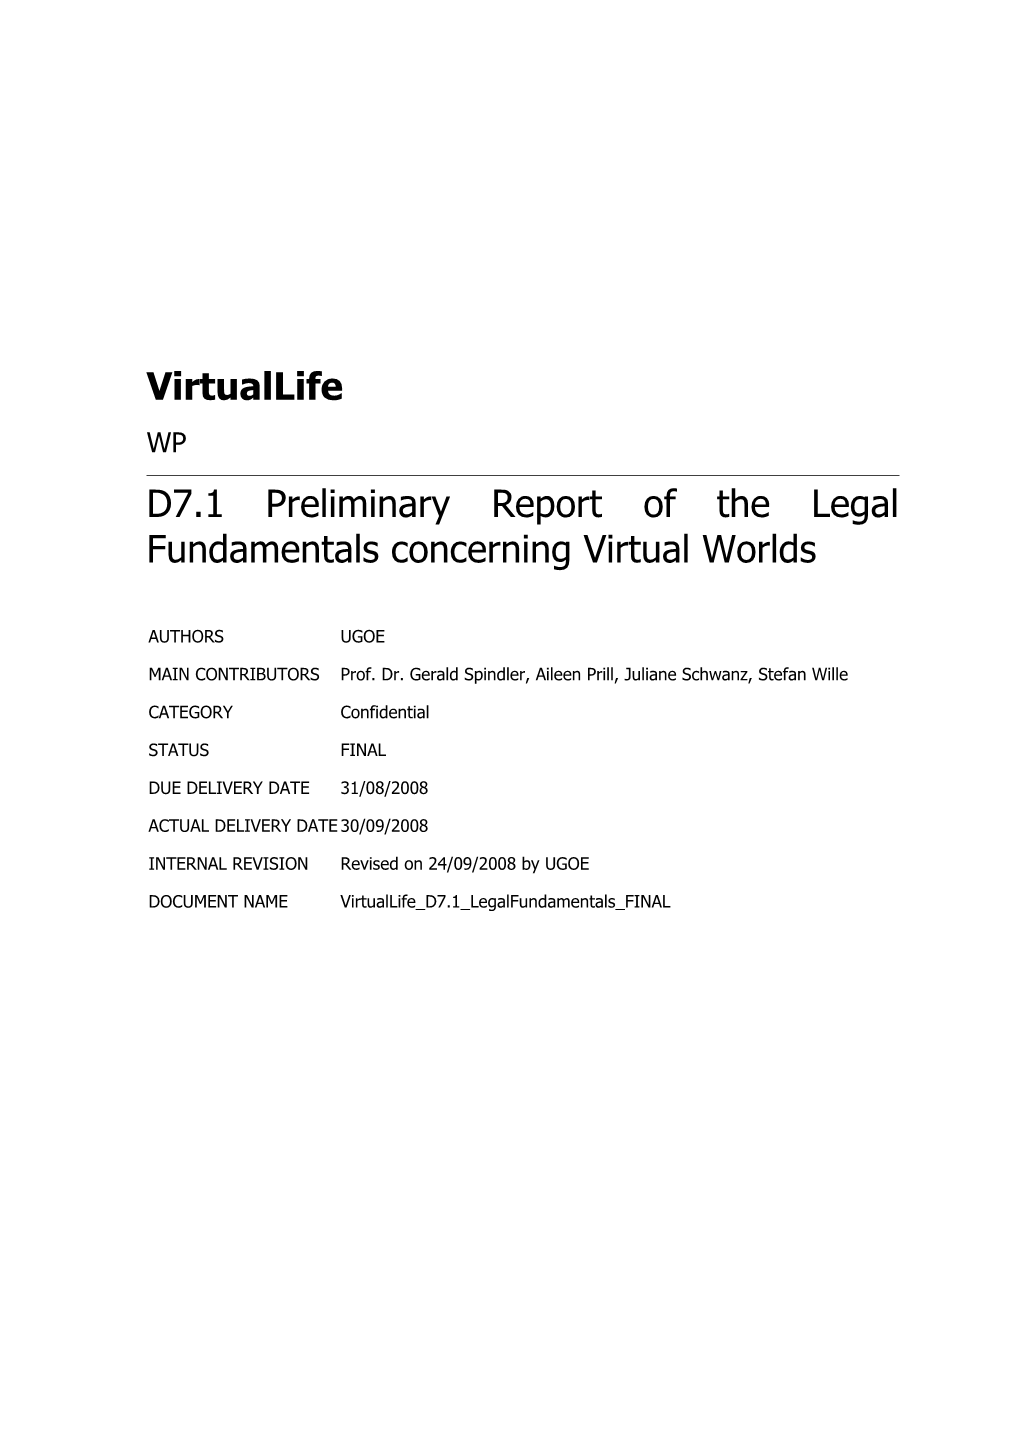 D 7.1 Preliminary Report of the Legal Fundamentals Concerning Virtual Worlds